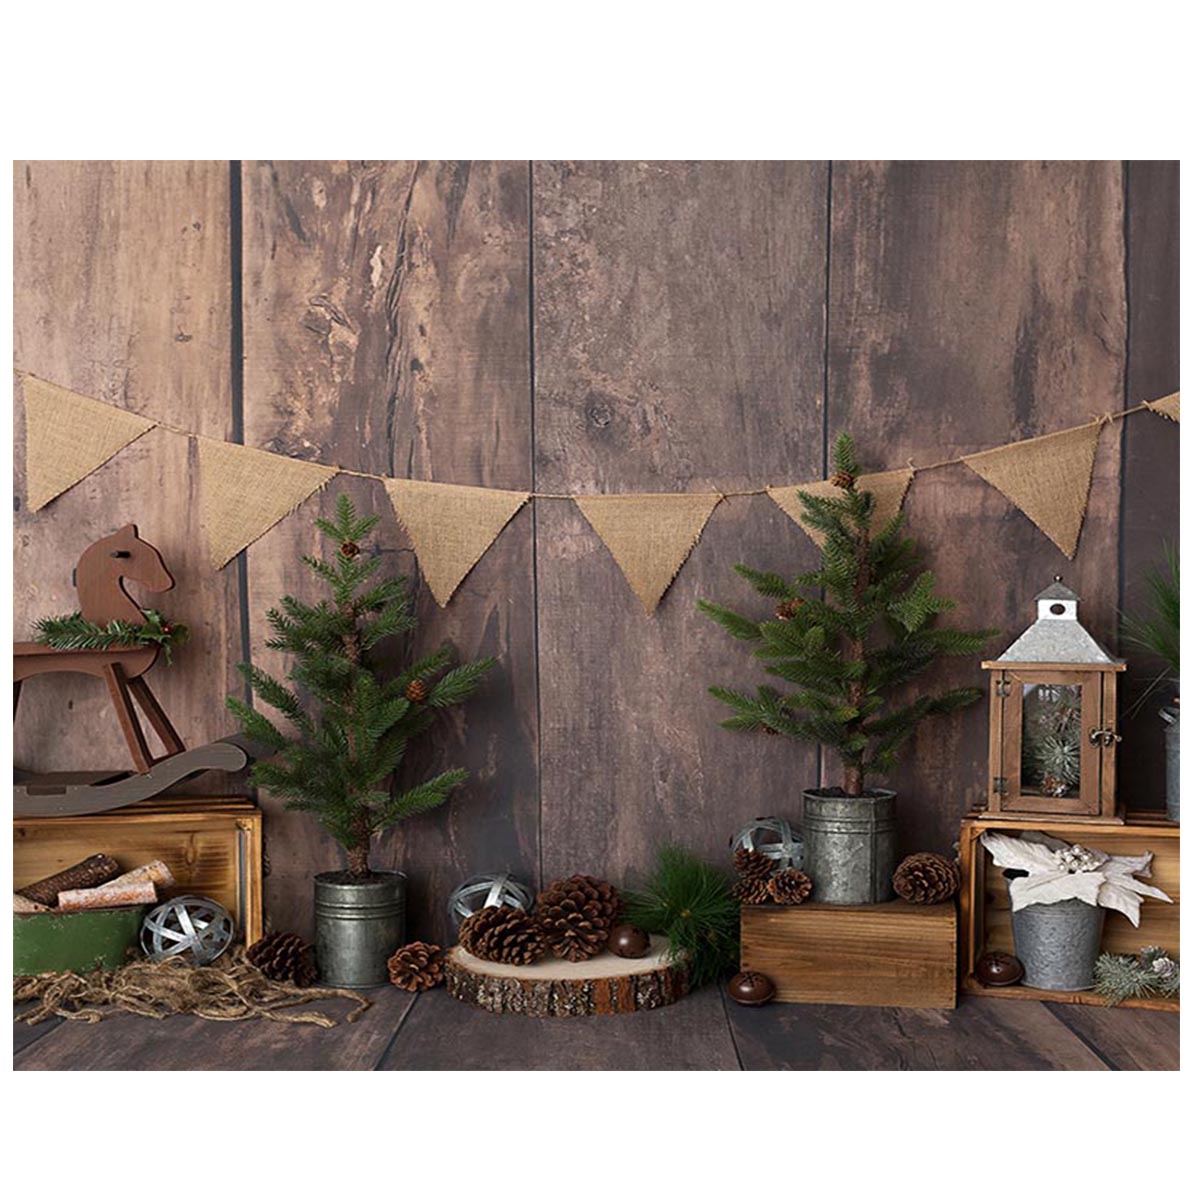 

5x3FT 7x5FT 8x6FT Wood Planks Wall Christmas Photography Backdrop Background Studio Prop